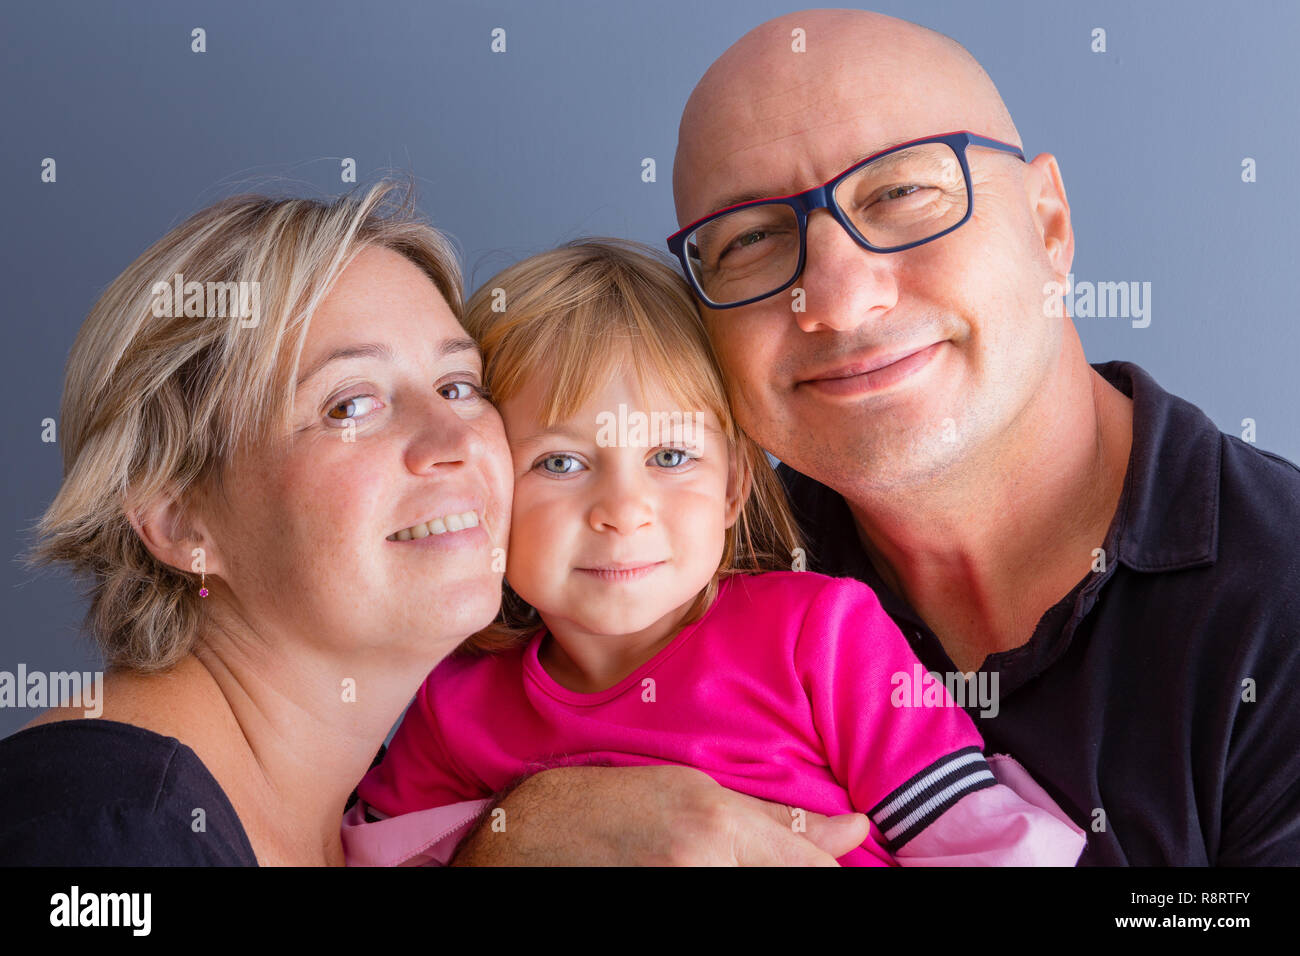 Close-up bust family portrait with parents and young daughter. Bold man in glasses, his blond wife and daughter in pink dress hanging close and smilin Stock Photo